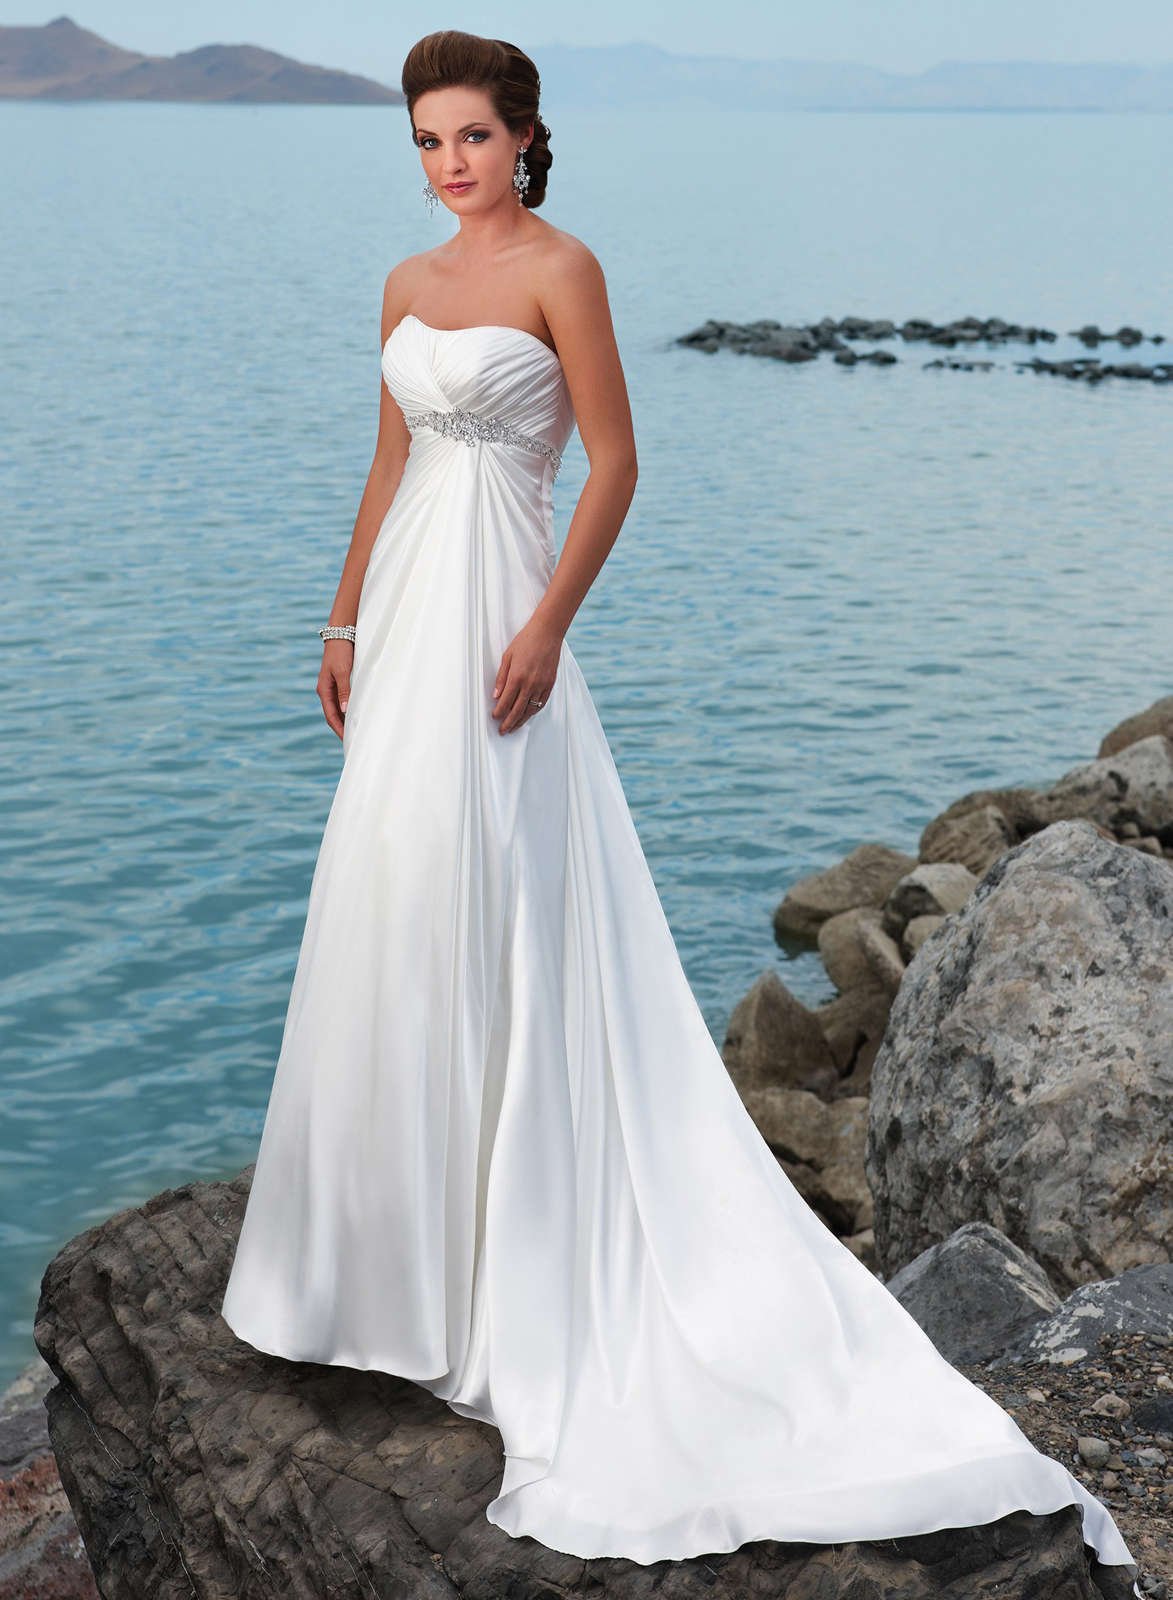 Best Wedding Dresses For Beach Ceremony The ultimate guide | longwedding2